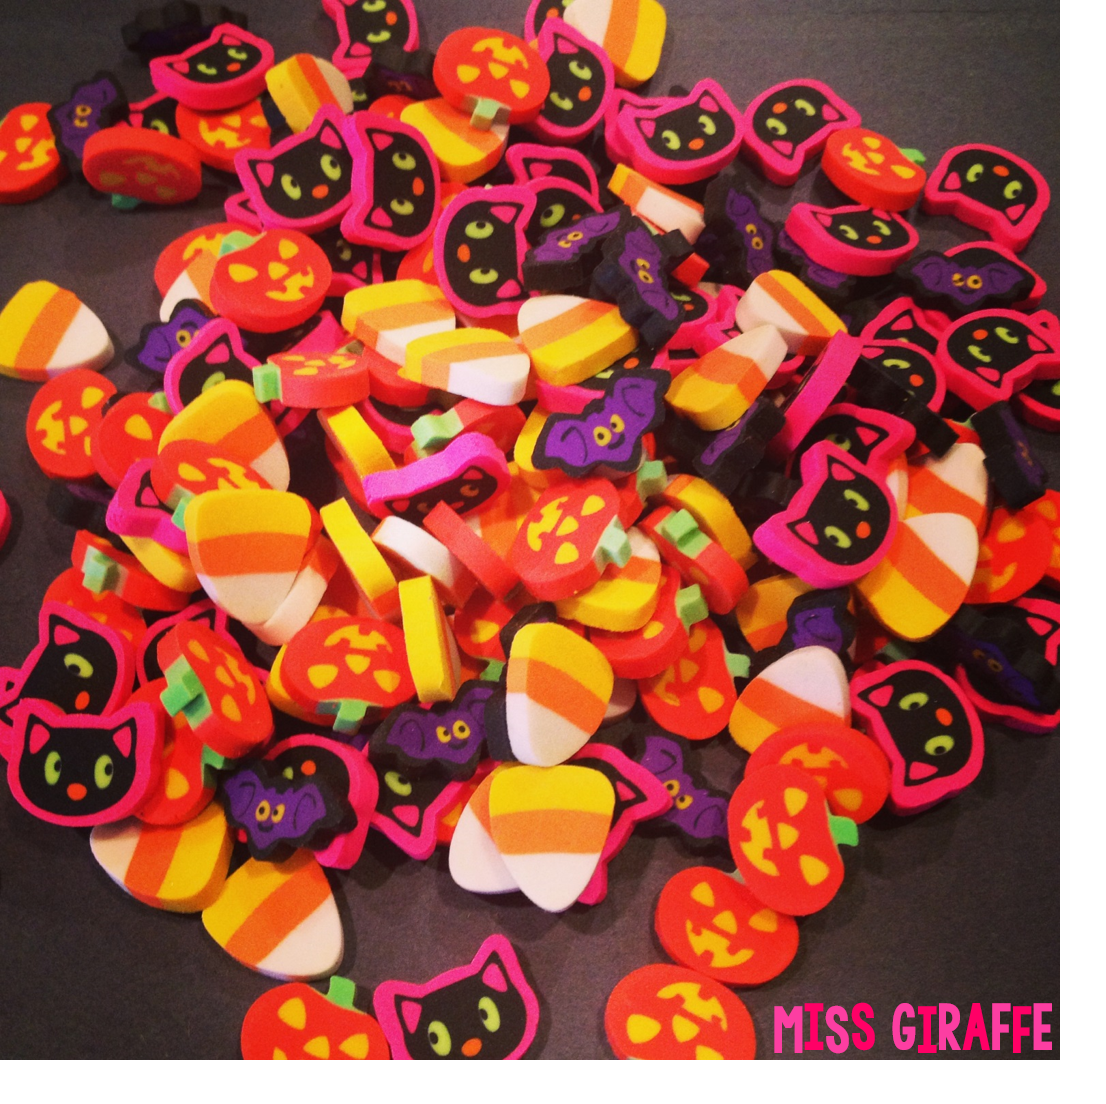 Fun ways to use mini erasers for Halloween math activities in the classroom!